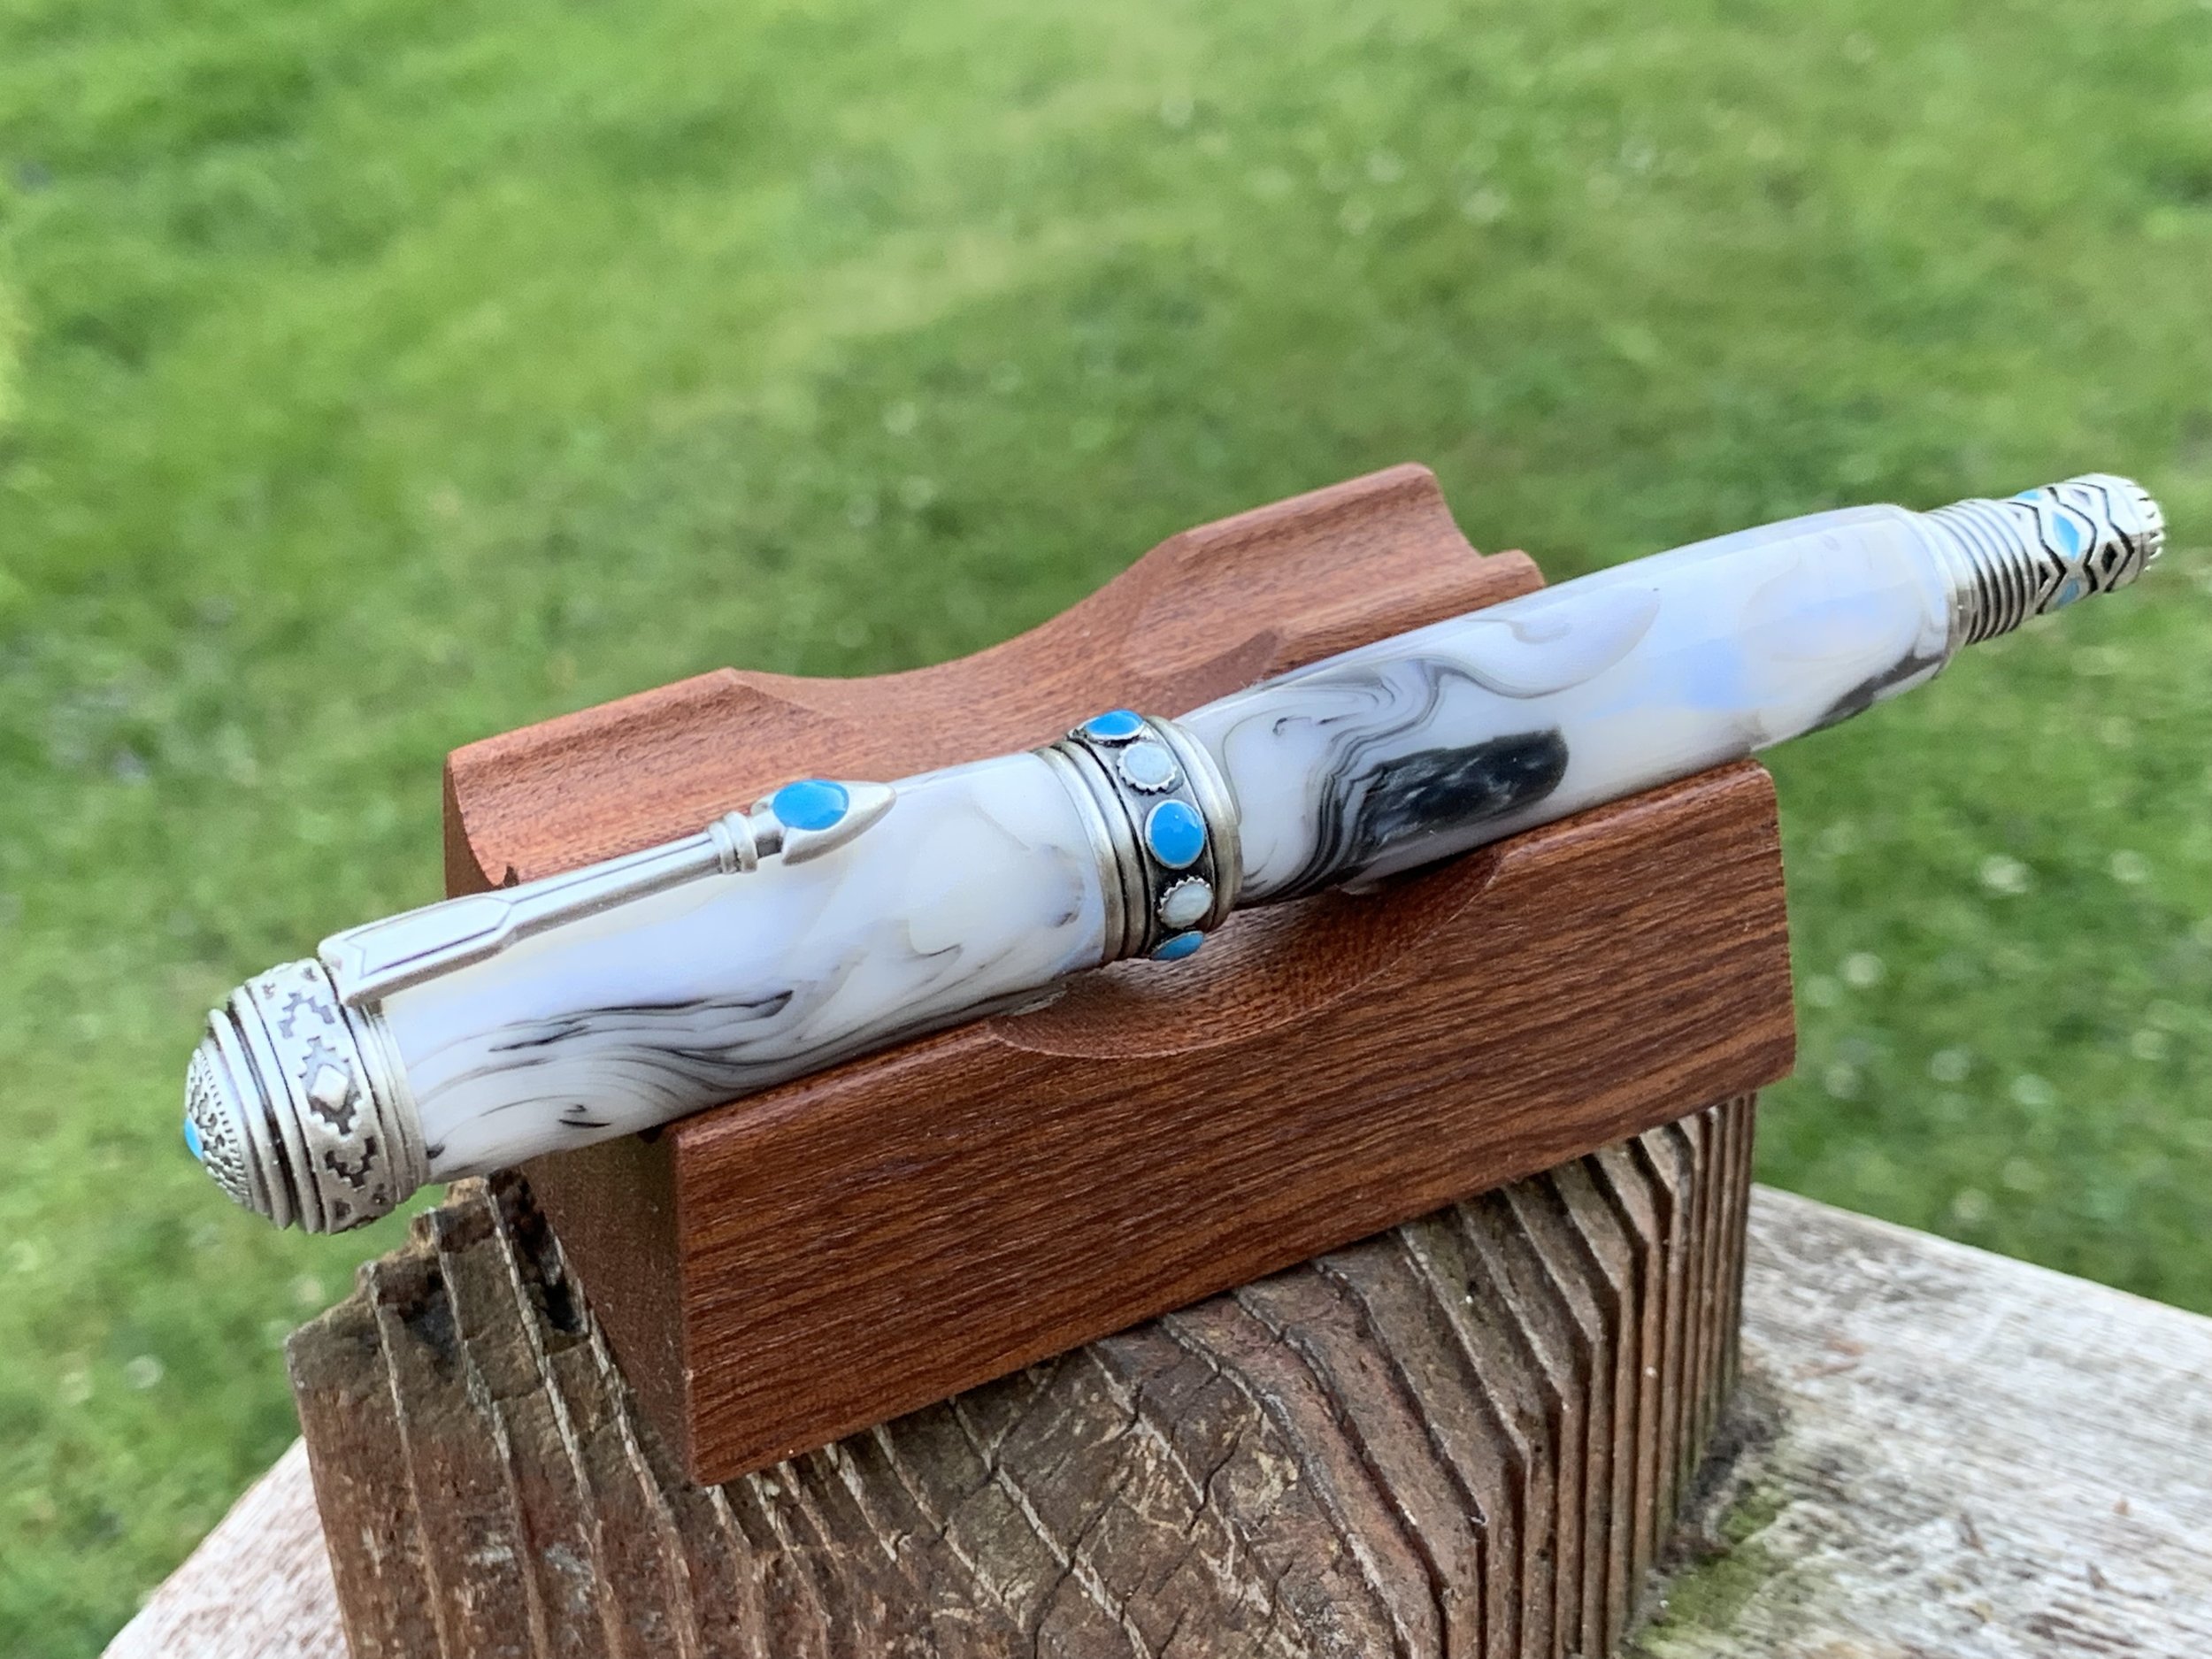 Southwest Rollerball - $60 - SOLD